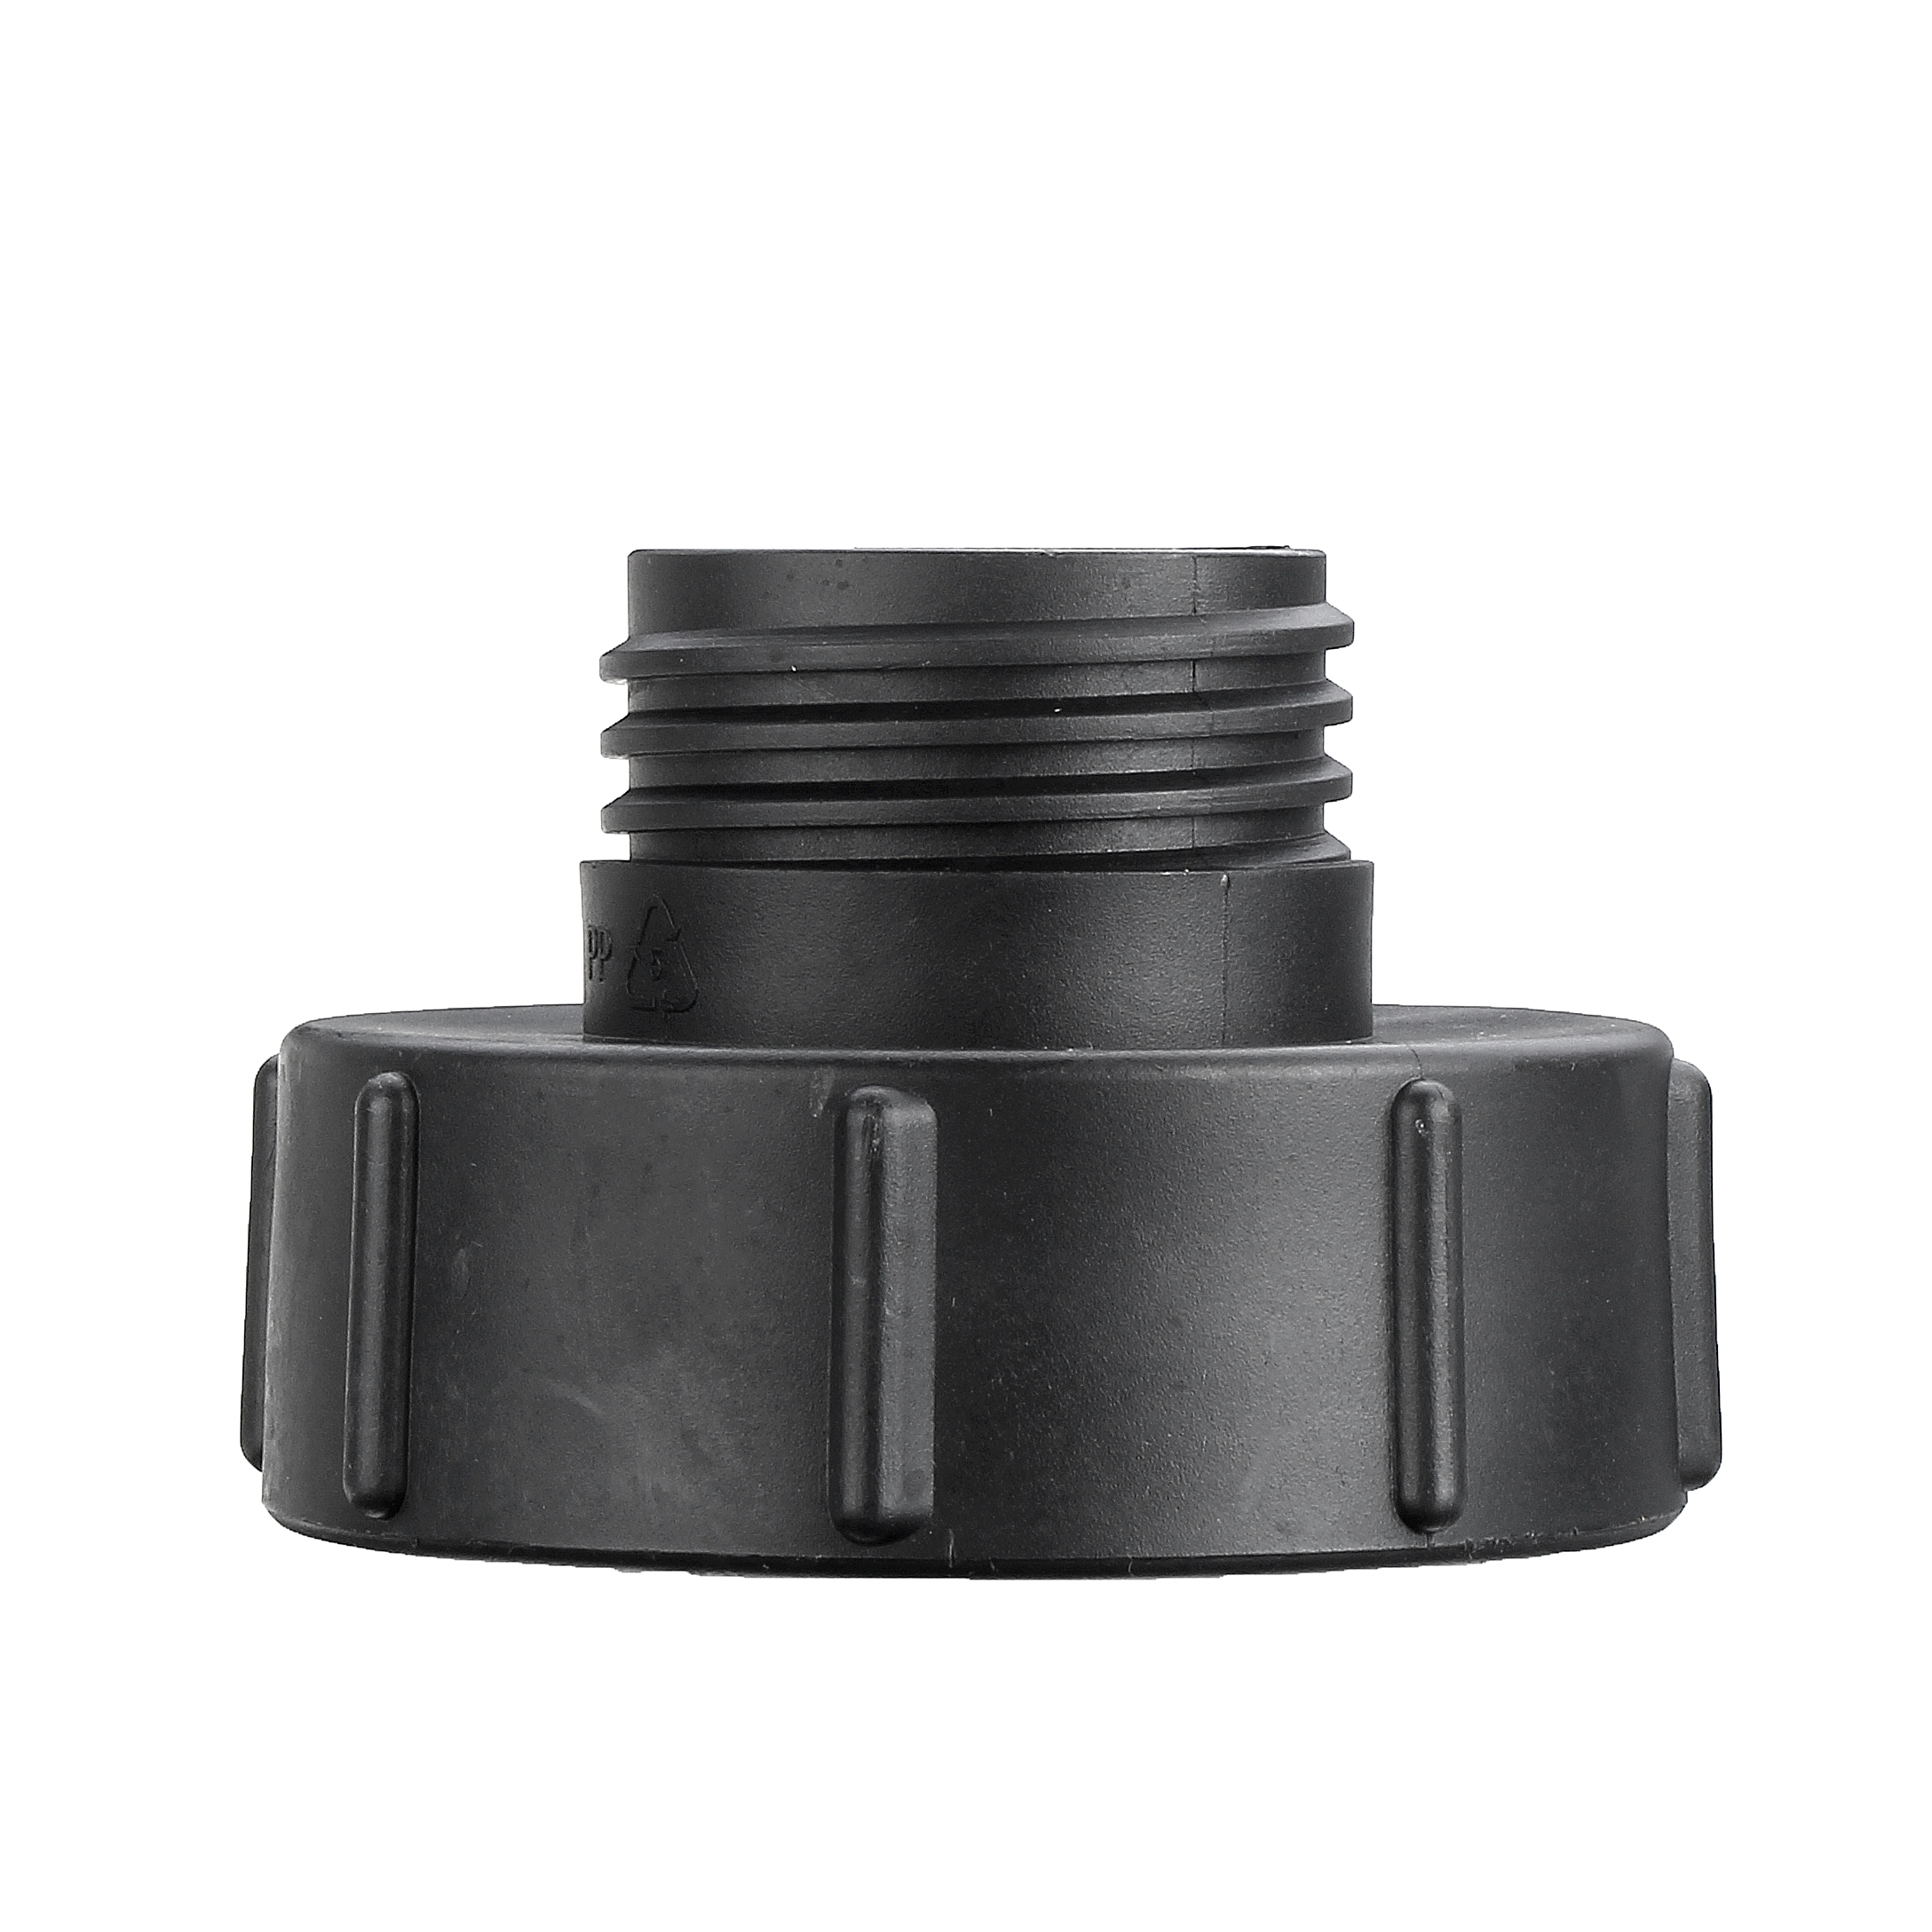 S100x8-1000L-IBC-Water-Tank-Garden-Hose-Adapter-Fittings-304-Stainless-Steel-Adapter-Outlet-Connecto-1550457